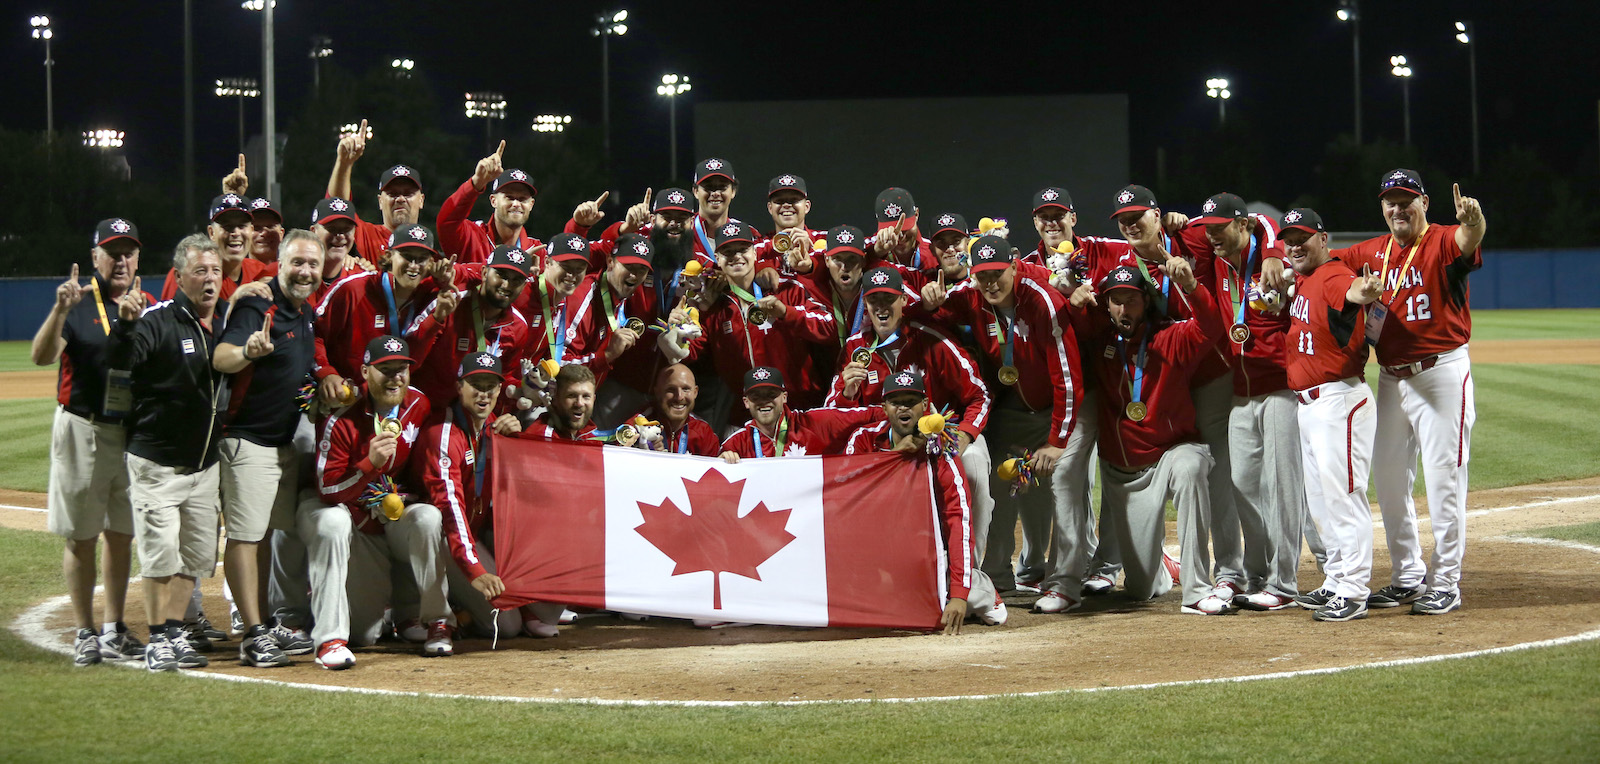 Catching up with TO2015 men's baseball gold medalists one year later